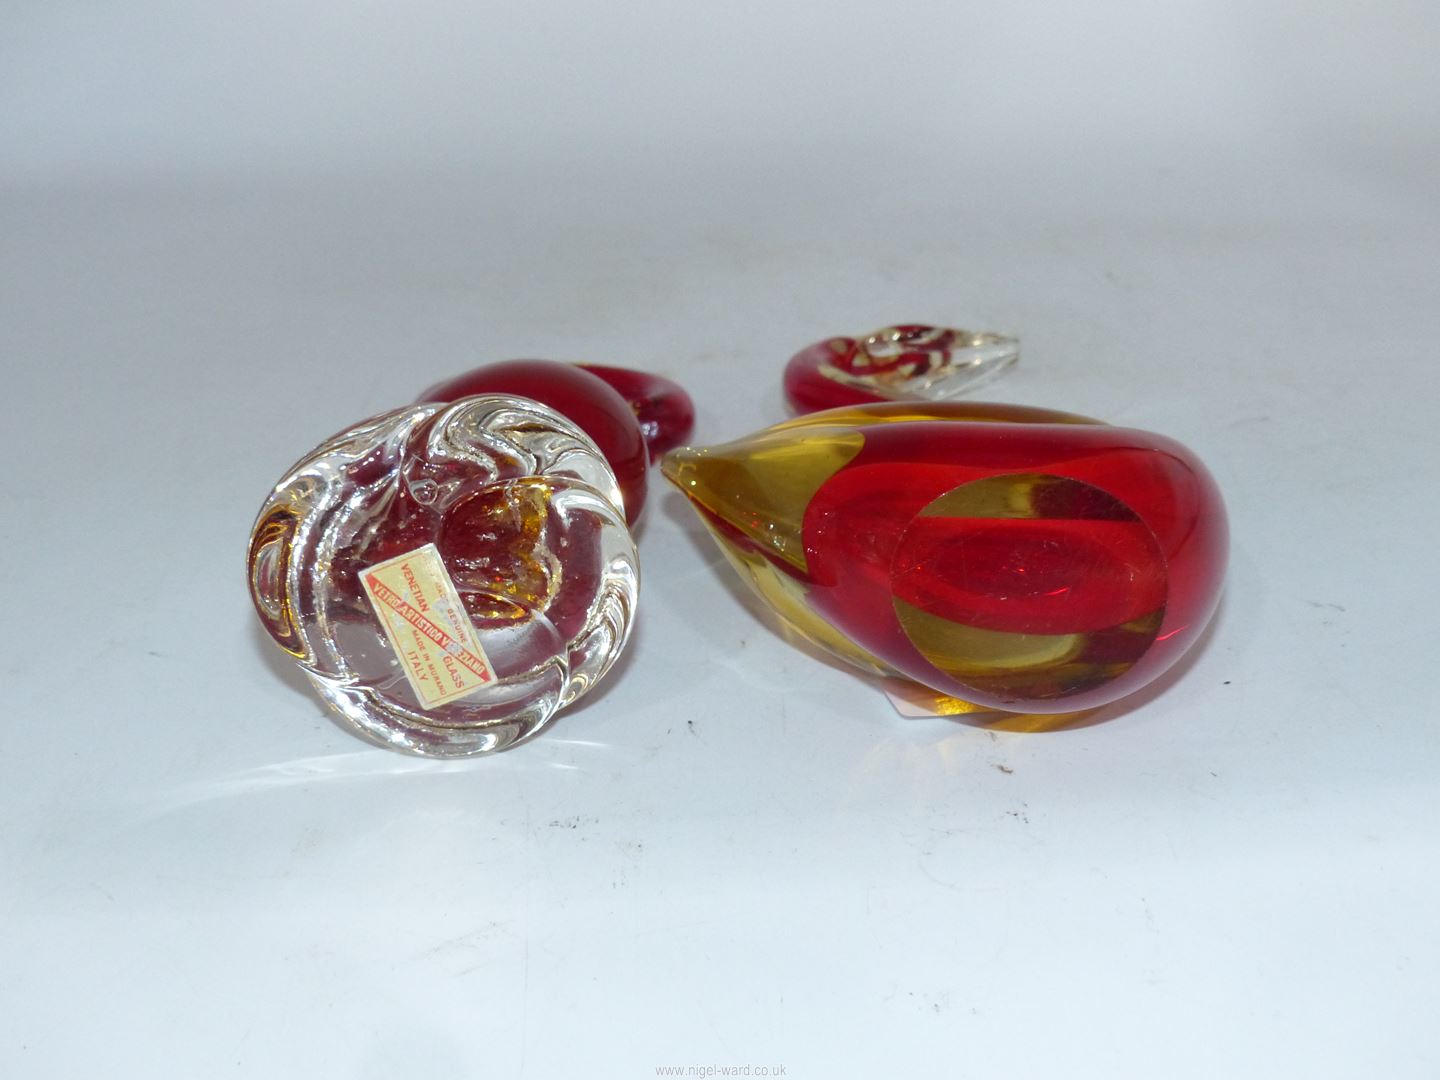 A Murano glass swan with base label "Vetro Artistico Veneziano" in red and cased with lemon - Image 3 of 3